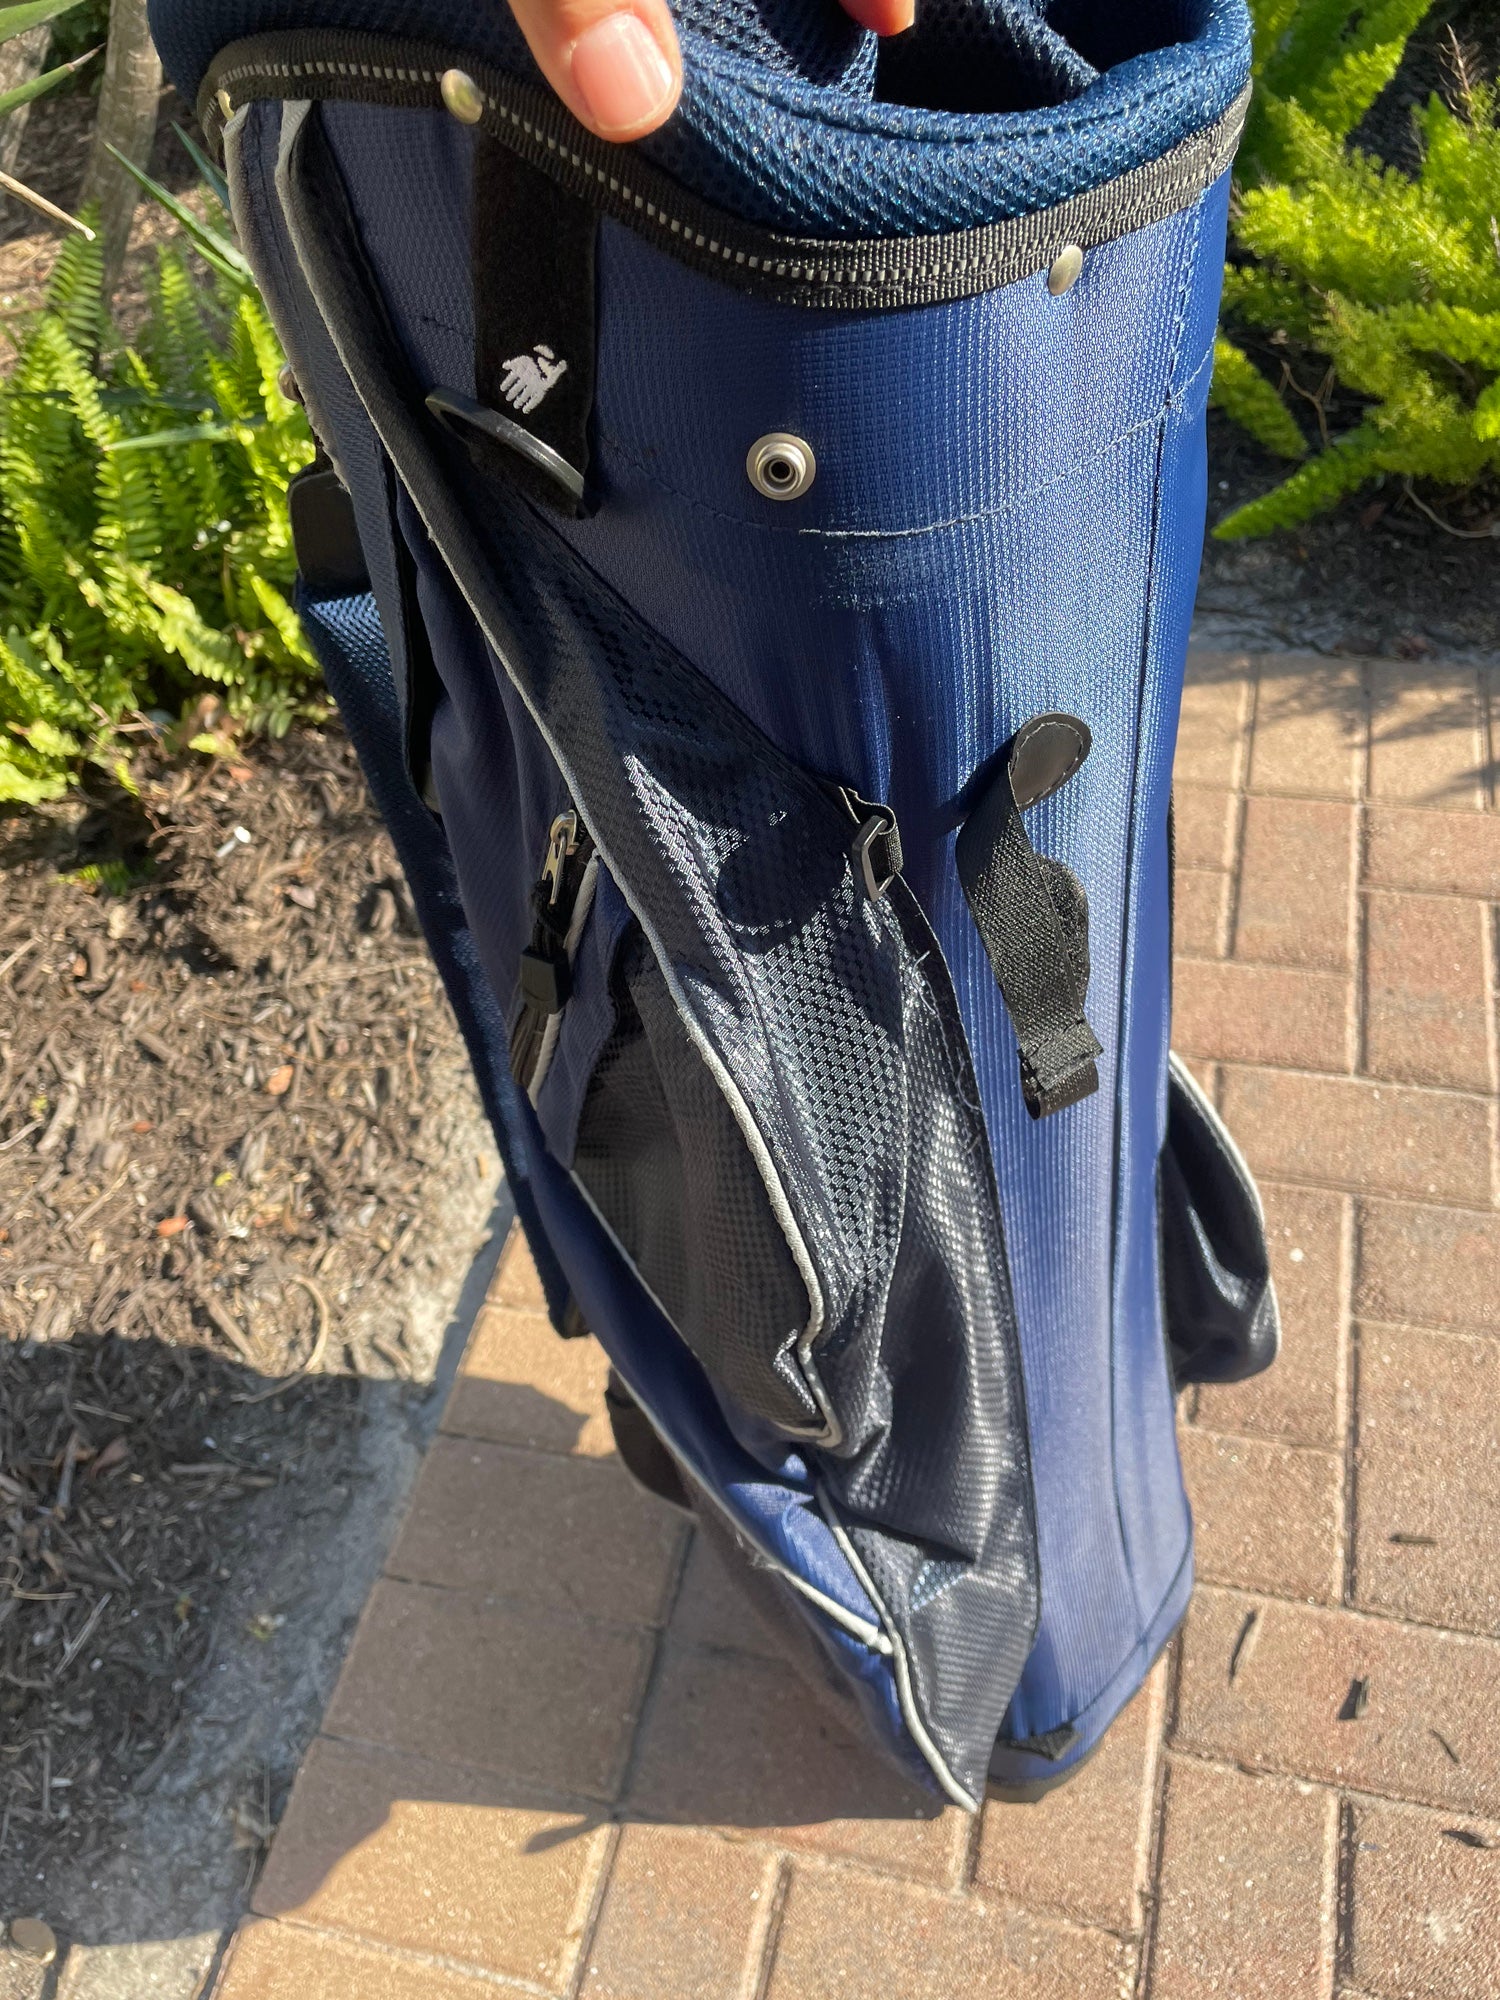 BOBOPRO Golf Stand Bag, Golf Bags with Stand, 14 Way Top Divider Golf Club Bag with Pockets, Cooler Pouch and Rain Hood, Dual Shoulder Straps, Light